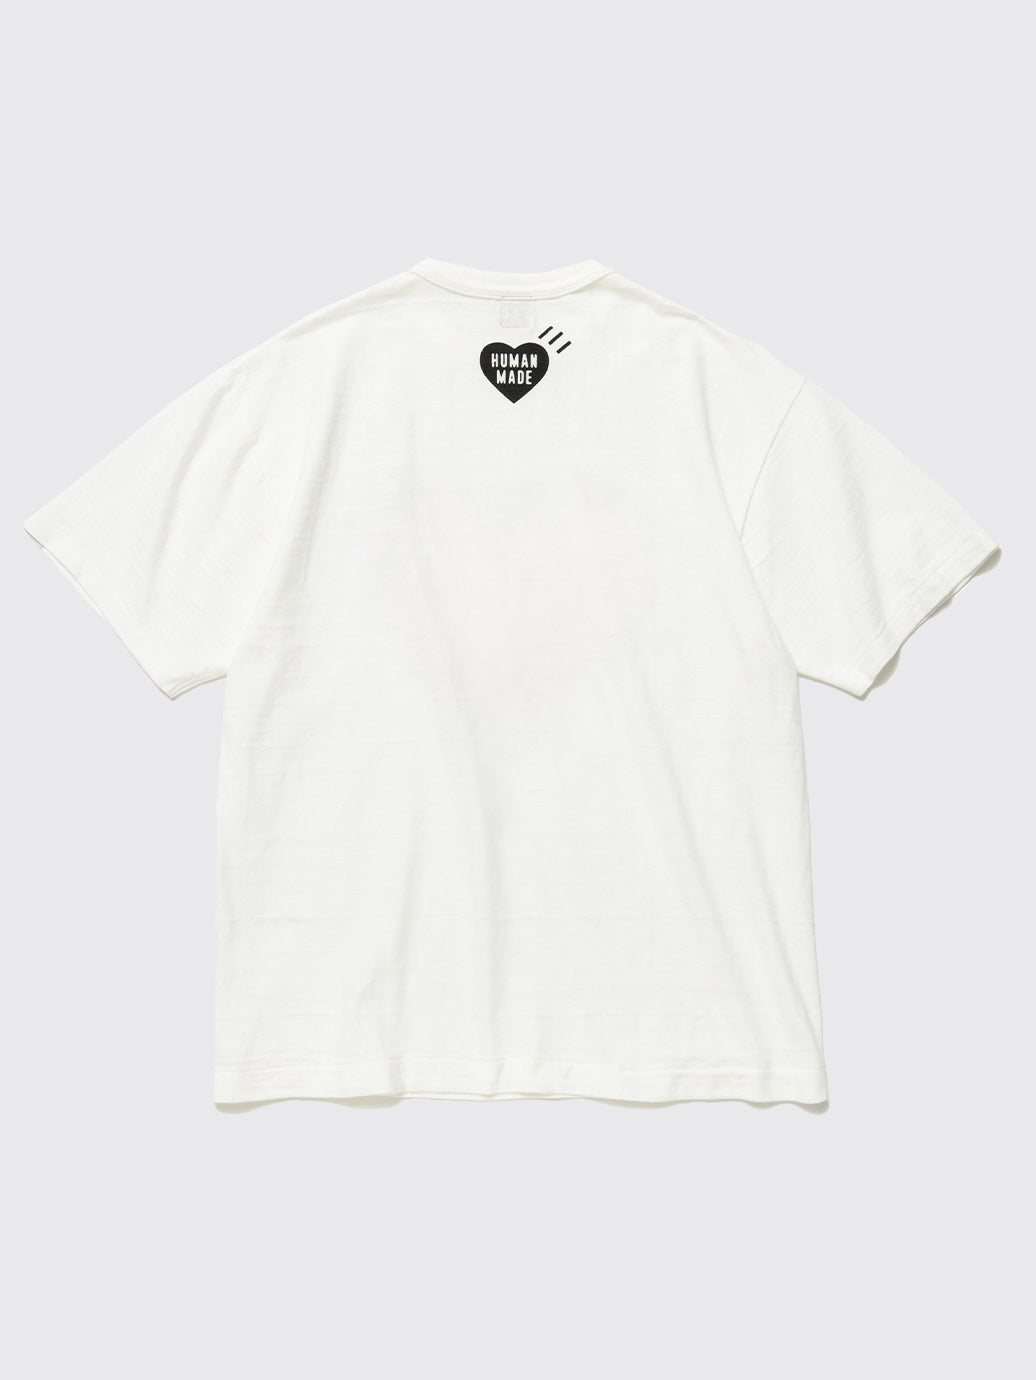 Human Made T-Shirt #14 Flying Duck FW22 White